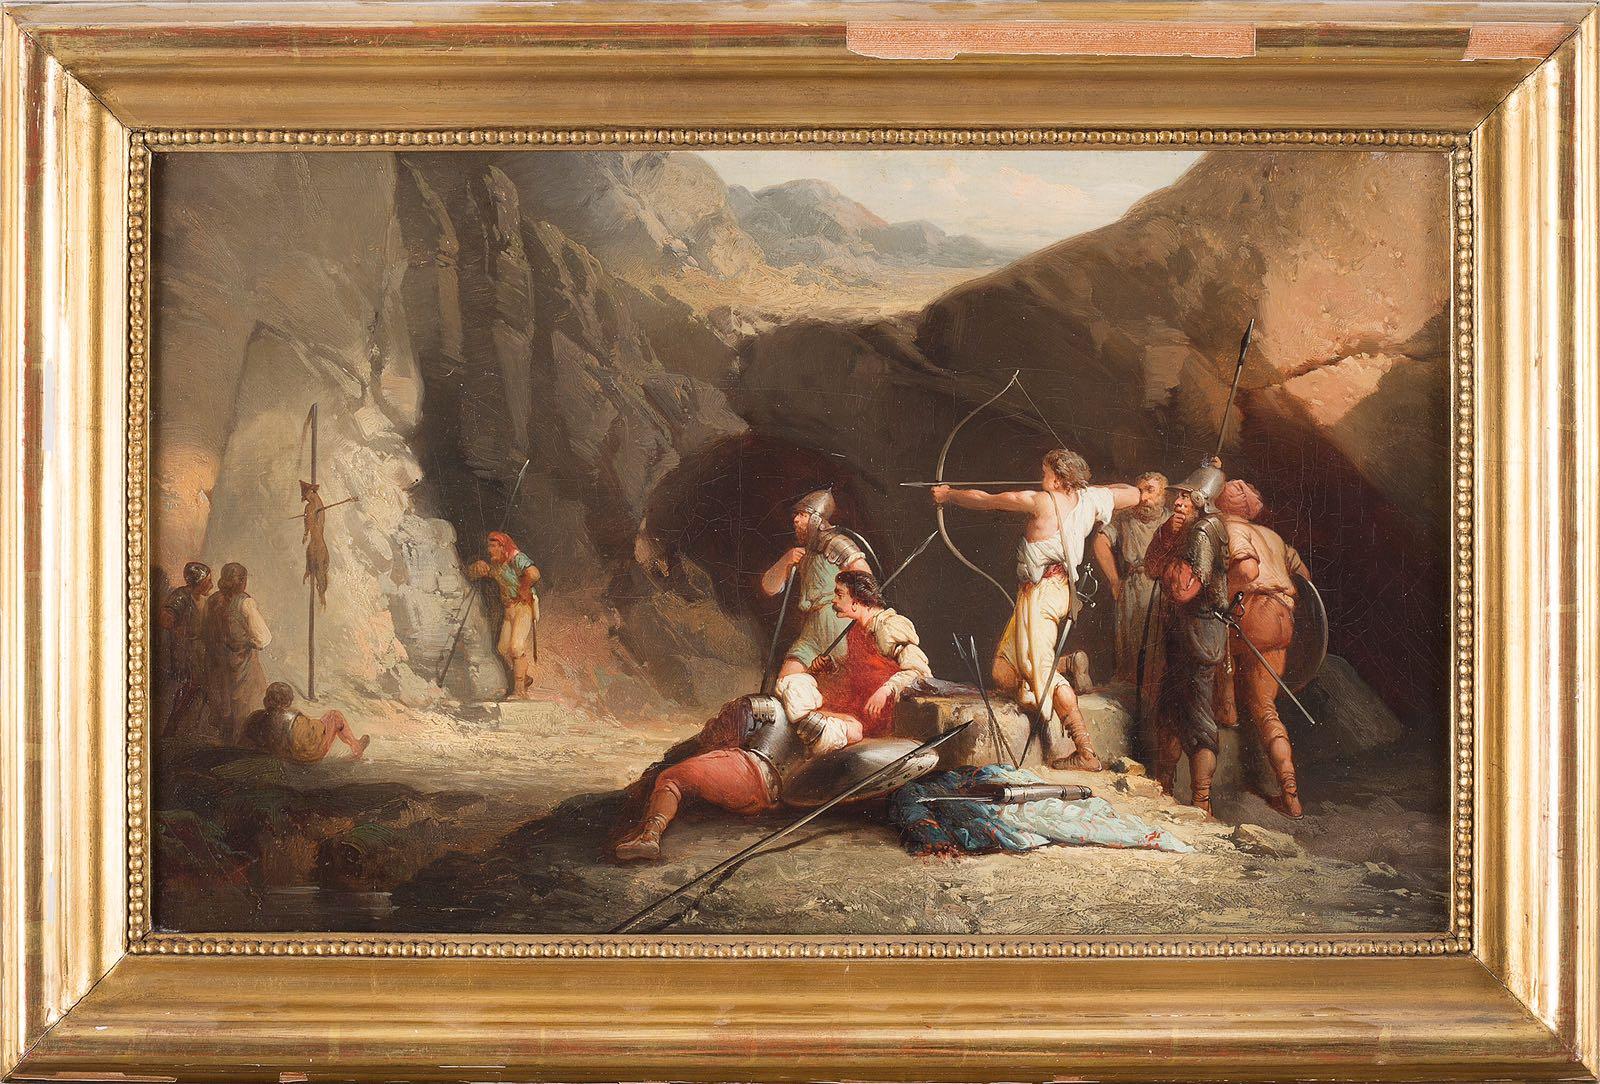 Unknown Figurative Painting - Archery - Oil on Canvas by an Anonymous French Master end of 18th/Early 19th